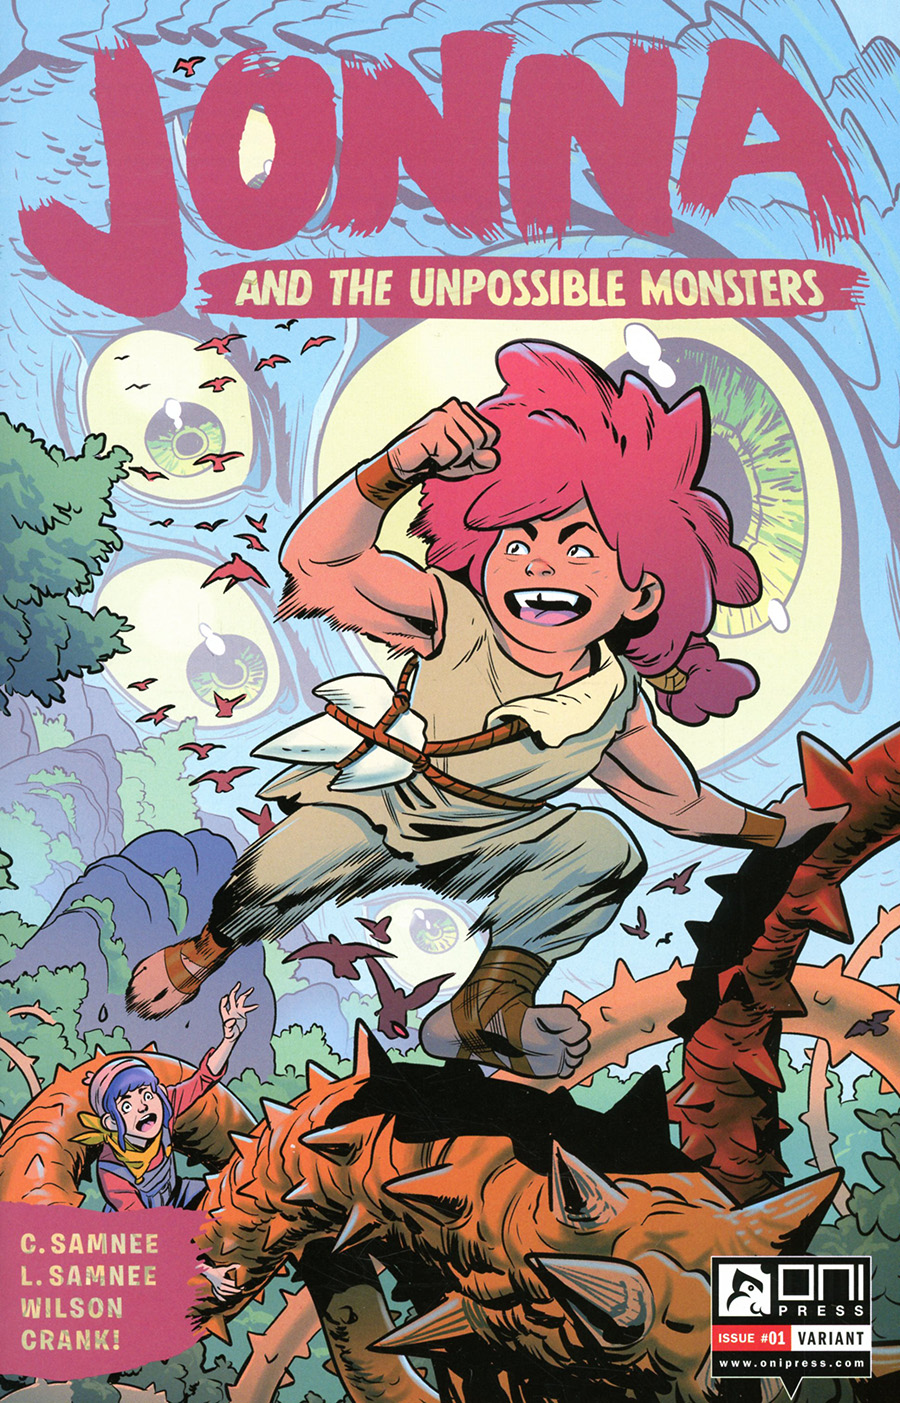 Jonna and the Unpossible Monsters #1 Cover F Promo Variant